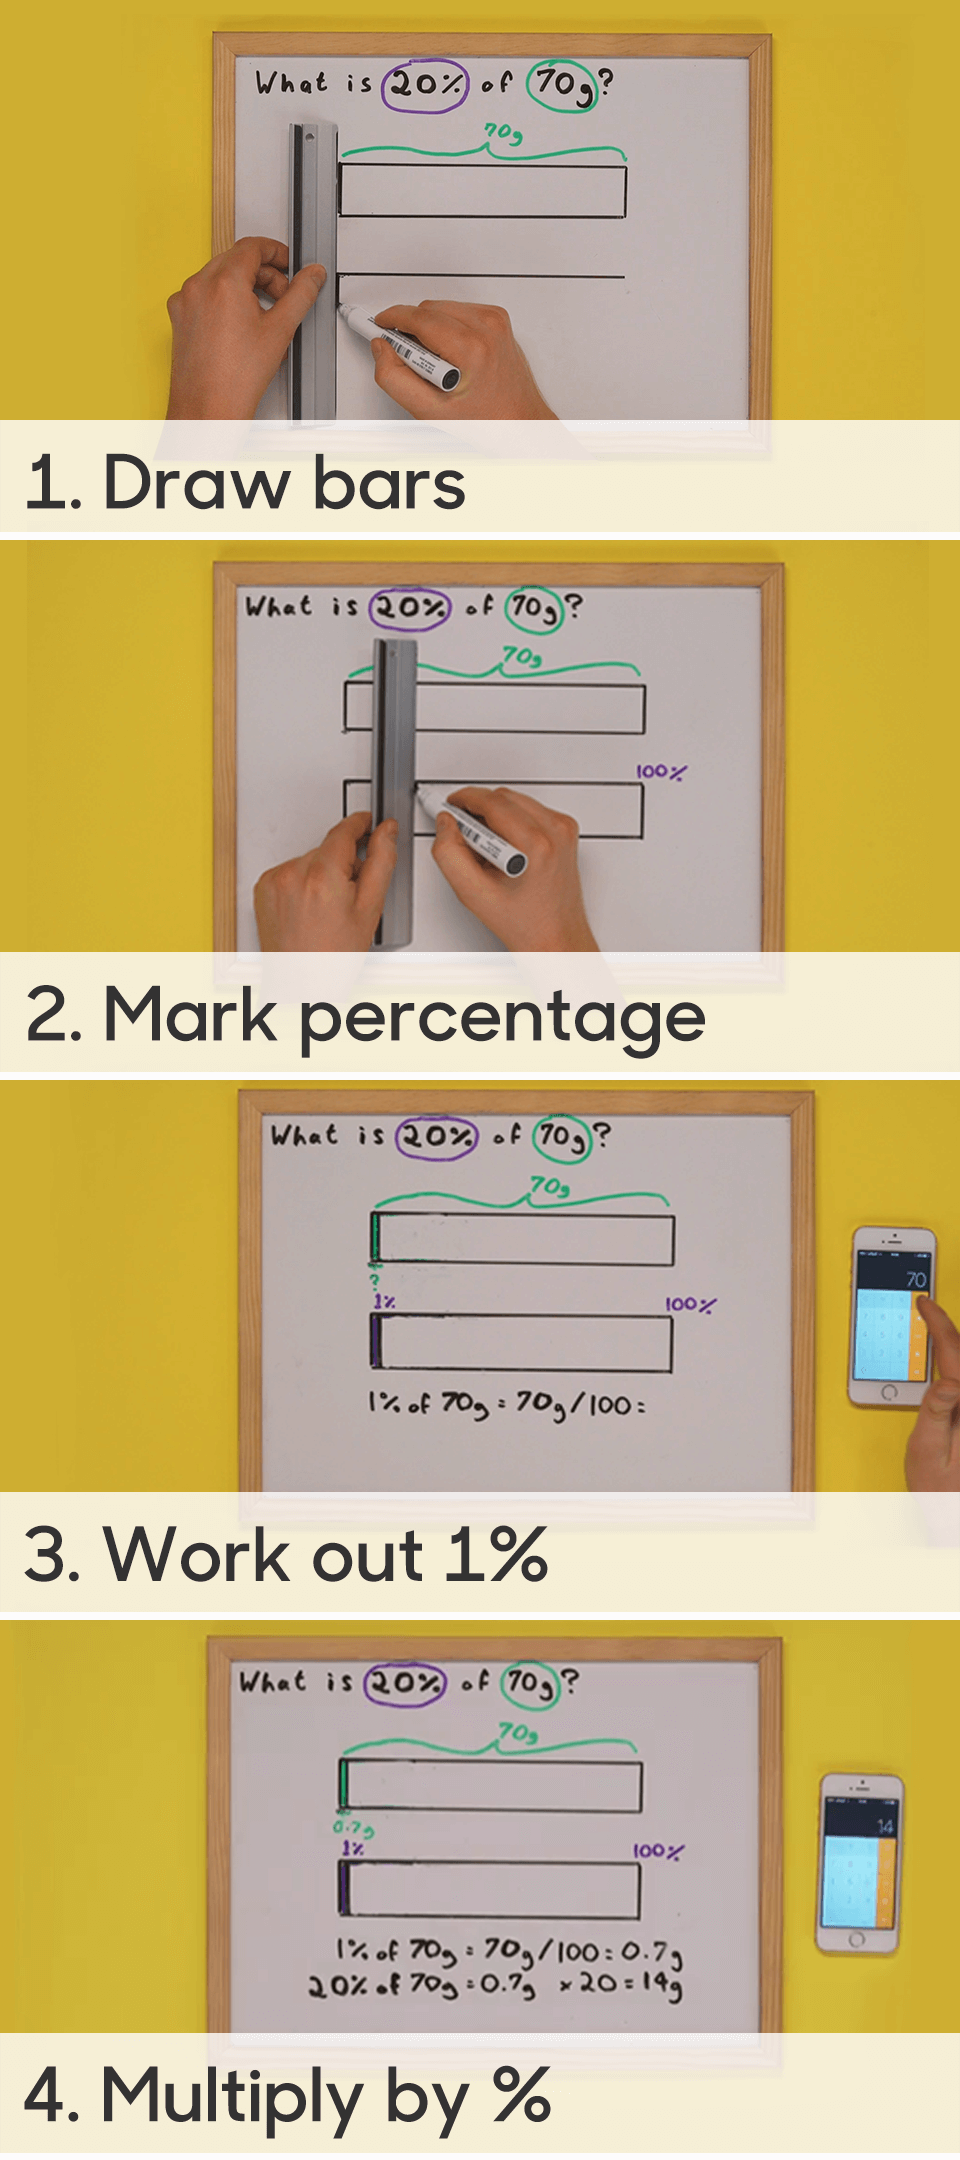 BBC Bitesize - How to work out a percentage of an amount (1% method)